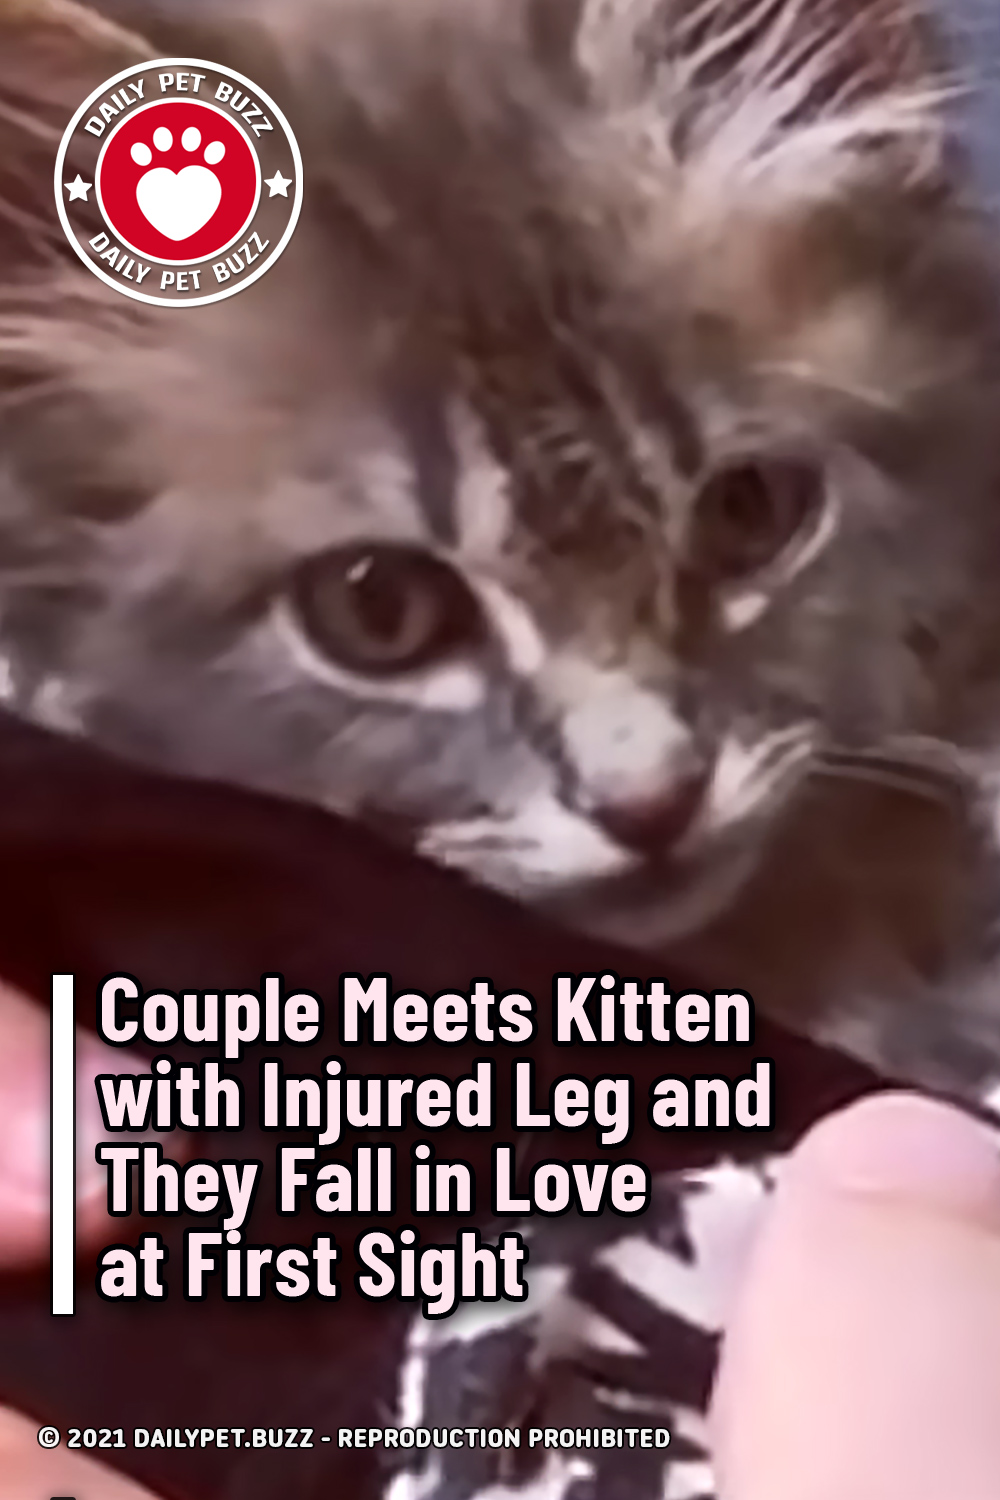 Couple Meets Kitten with Injured Leg and They Fall in Love at First Sight